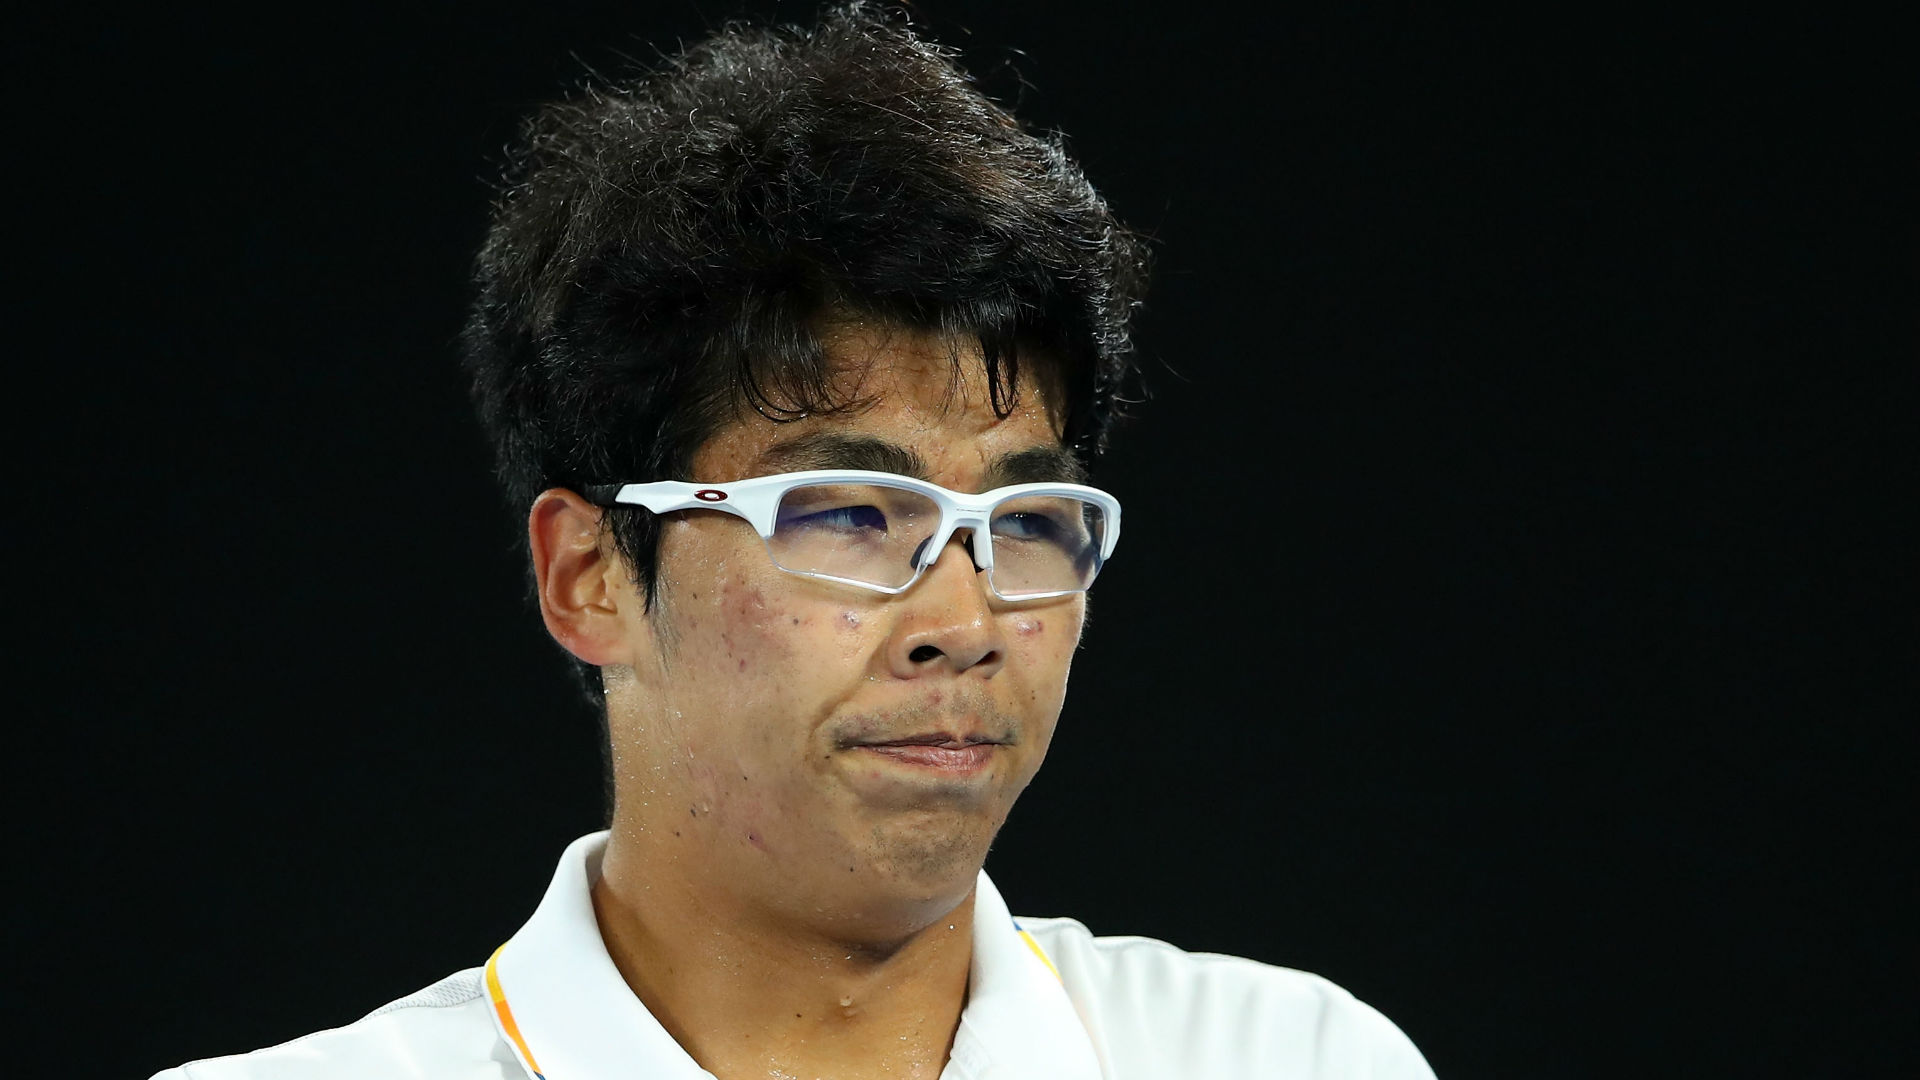 It might be difficult for Hyeon Chung to replicate his Australian Open performance in Indian Wells after losing his rackets in transit.